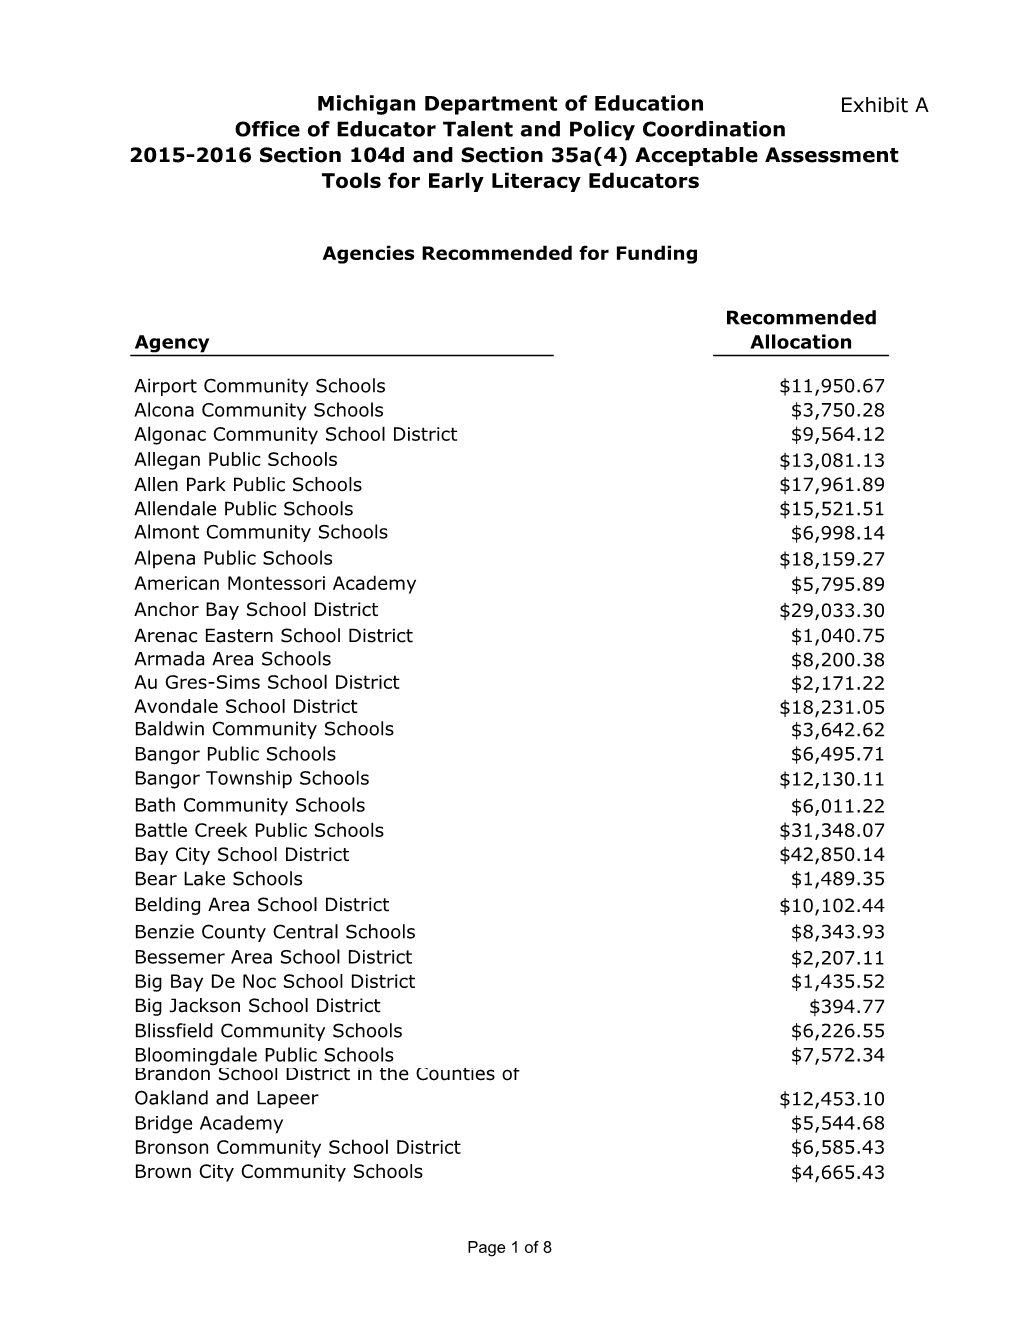 2015-2016 Section 104D and Section 35A(4) Acceptable Assessment Tools for Early Literacy Educators Grant Awardees